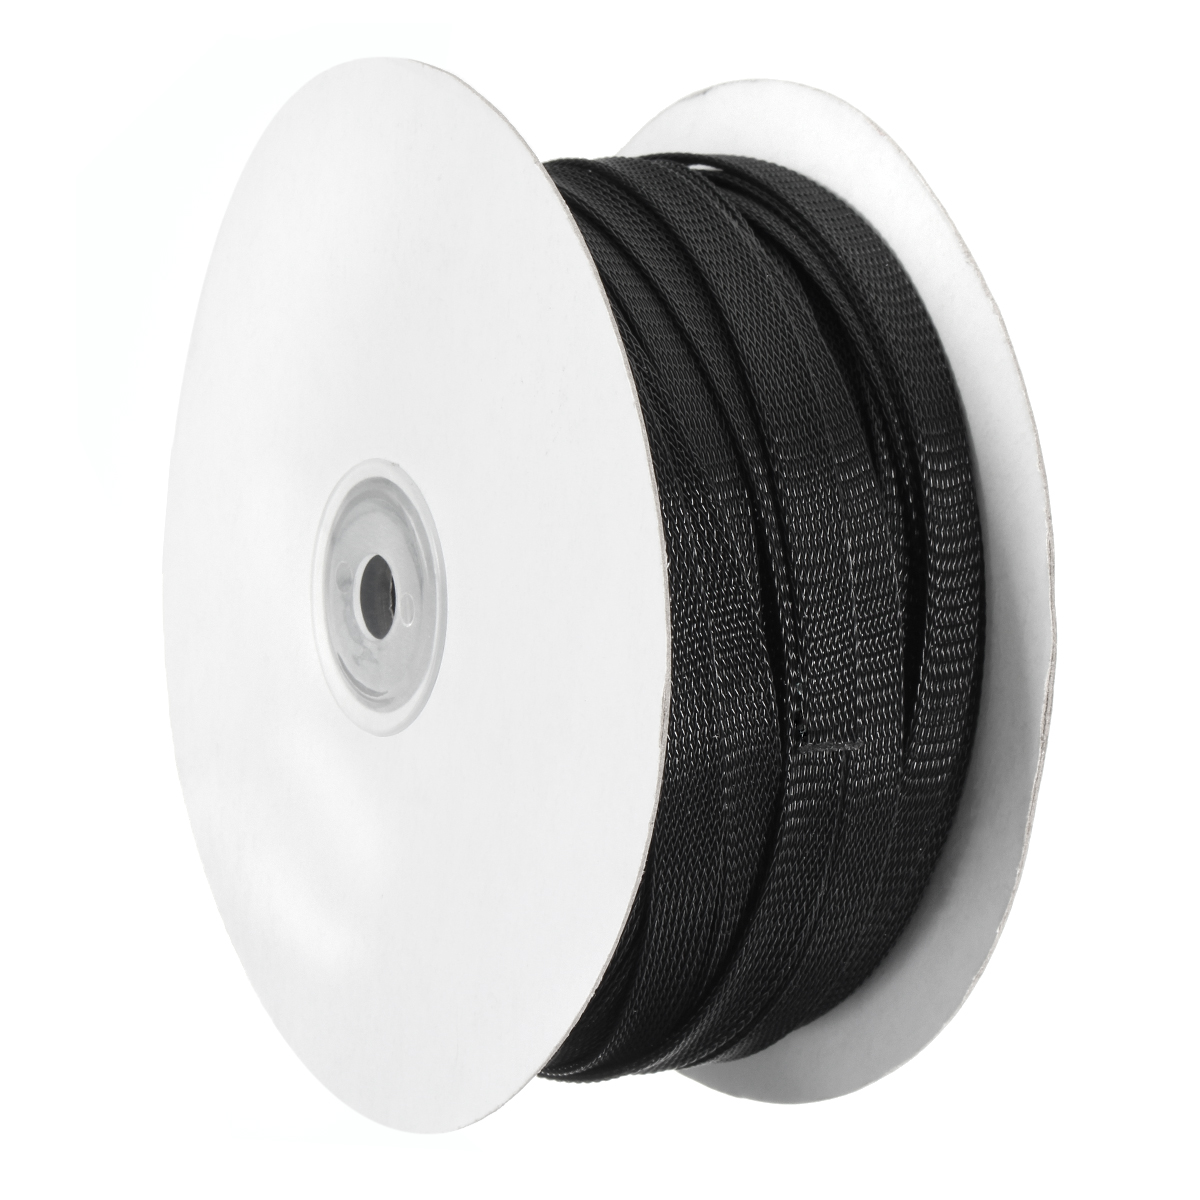 30m-8mm10mm12mm15mm20mm-Expandable-Wire-Cable-Sleeving-Braided-Tubing-Black-1179626-1